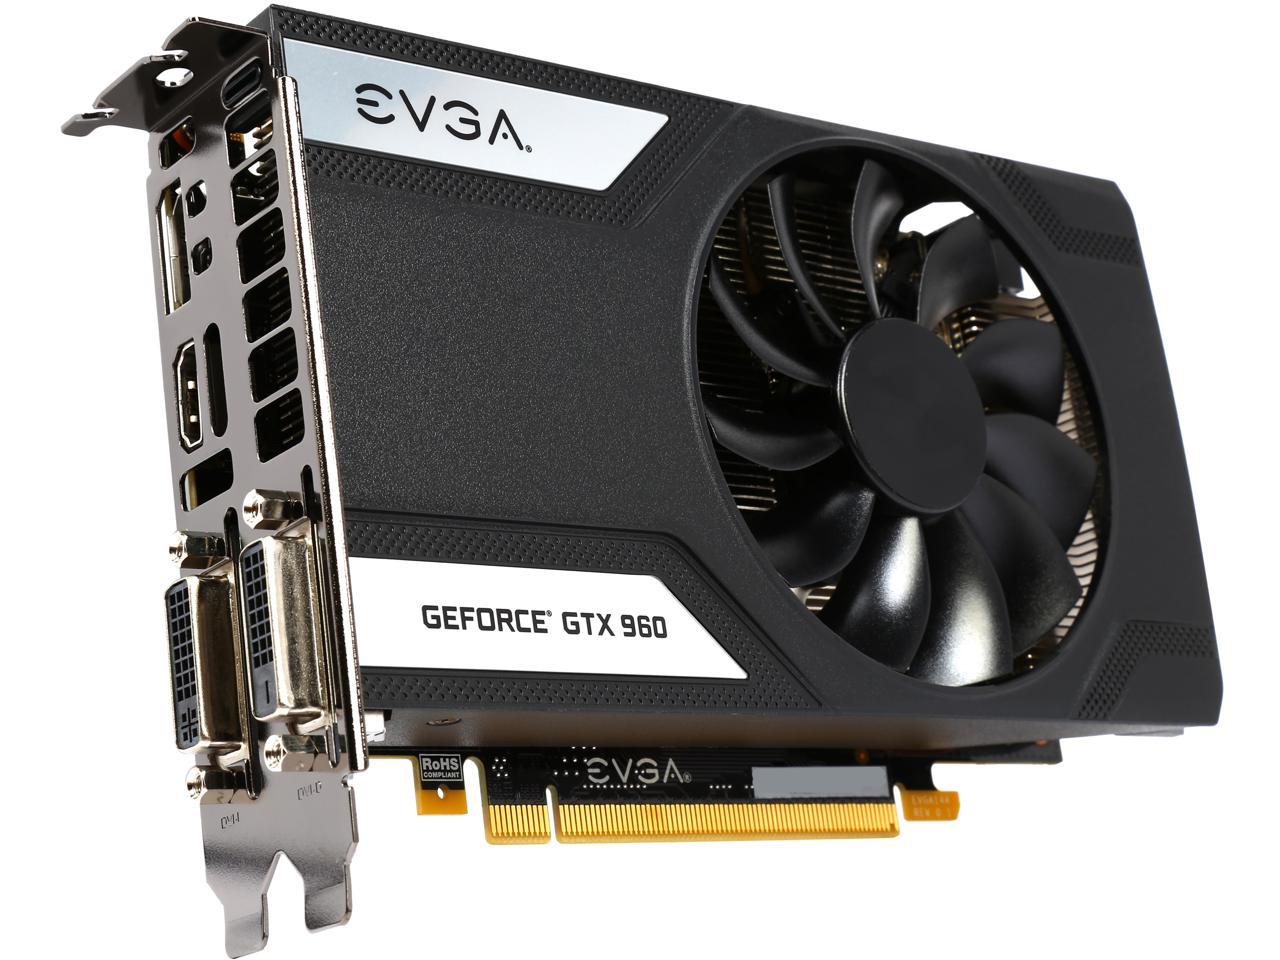 Evga Geforce Gtx 960 02g P4 2962 Kr 2gb Sc Gaming Only 6 8 Inches Perfect For Mitx Build Graphics Card Newegg Com